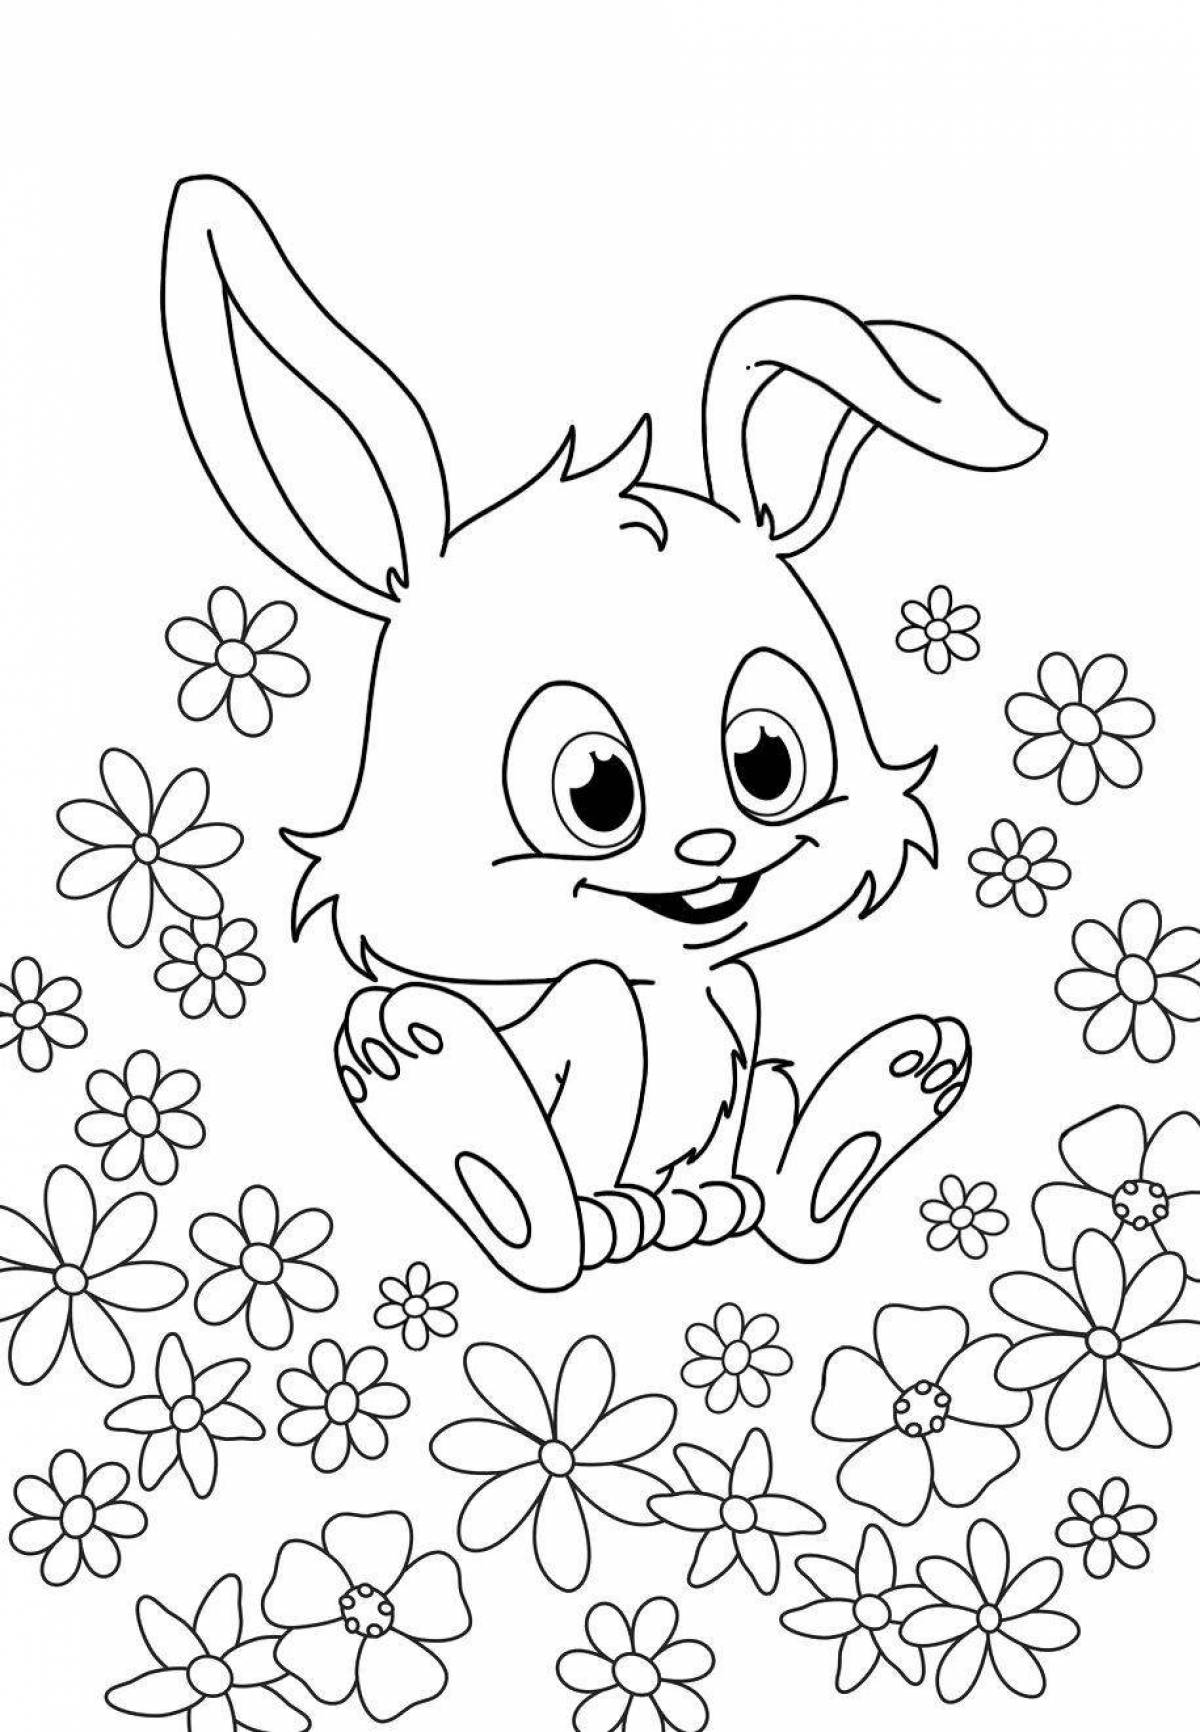 Luminous sunbeams coloring pages for kids